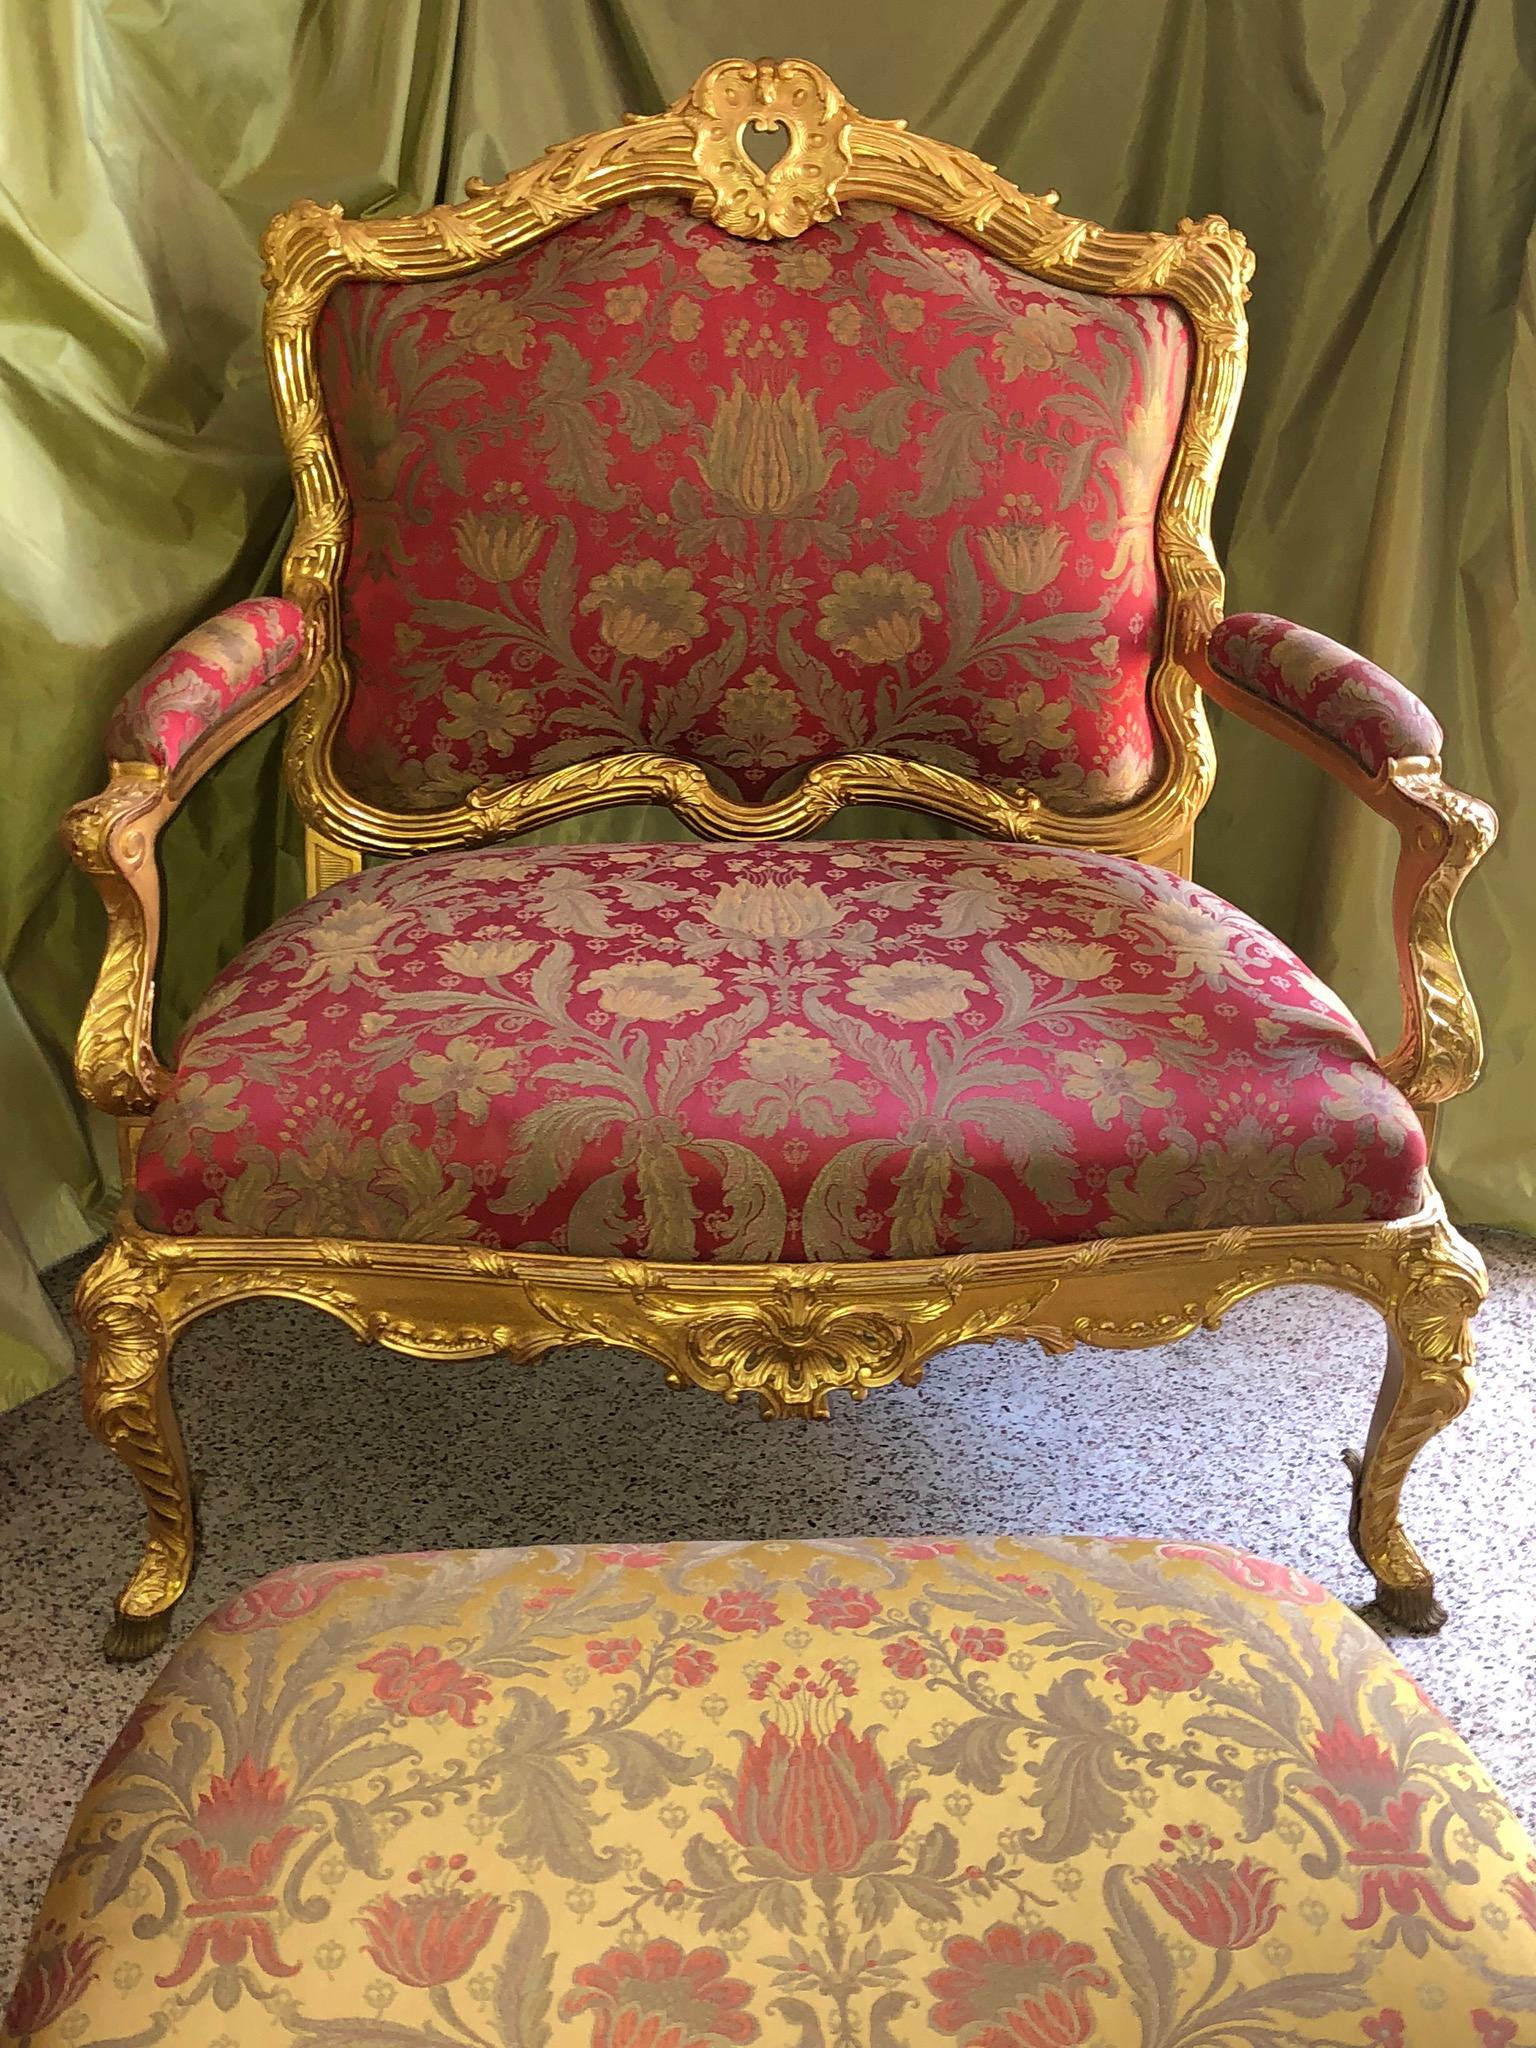 Gilt Regency Louis XV Style Marquise Chair, Settee For Sale